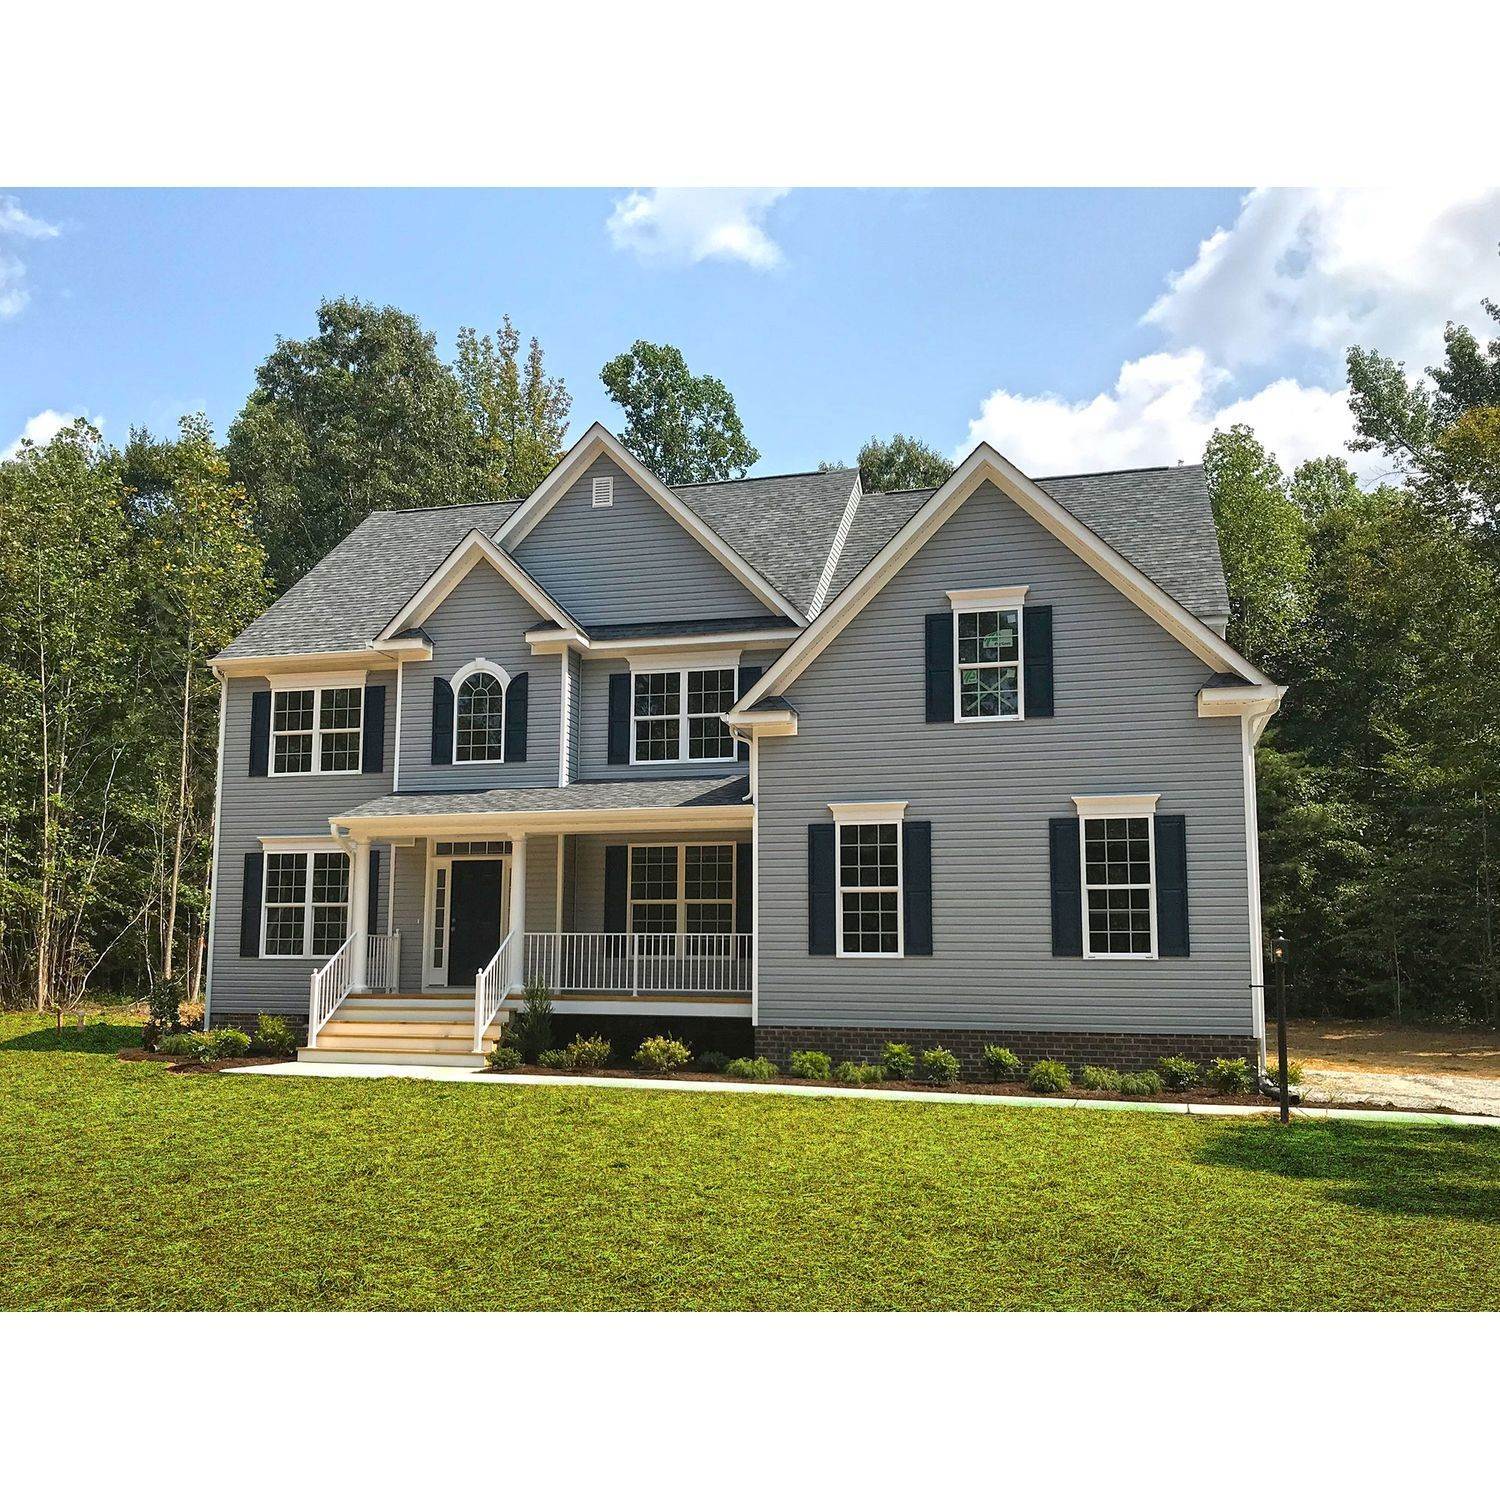 21. Meadowville Landing xây dựng tại 11619 Riverboat Drive, Chester, VA 23836